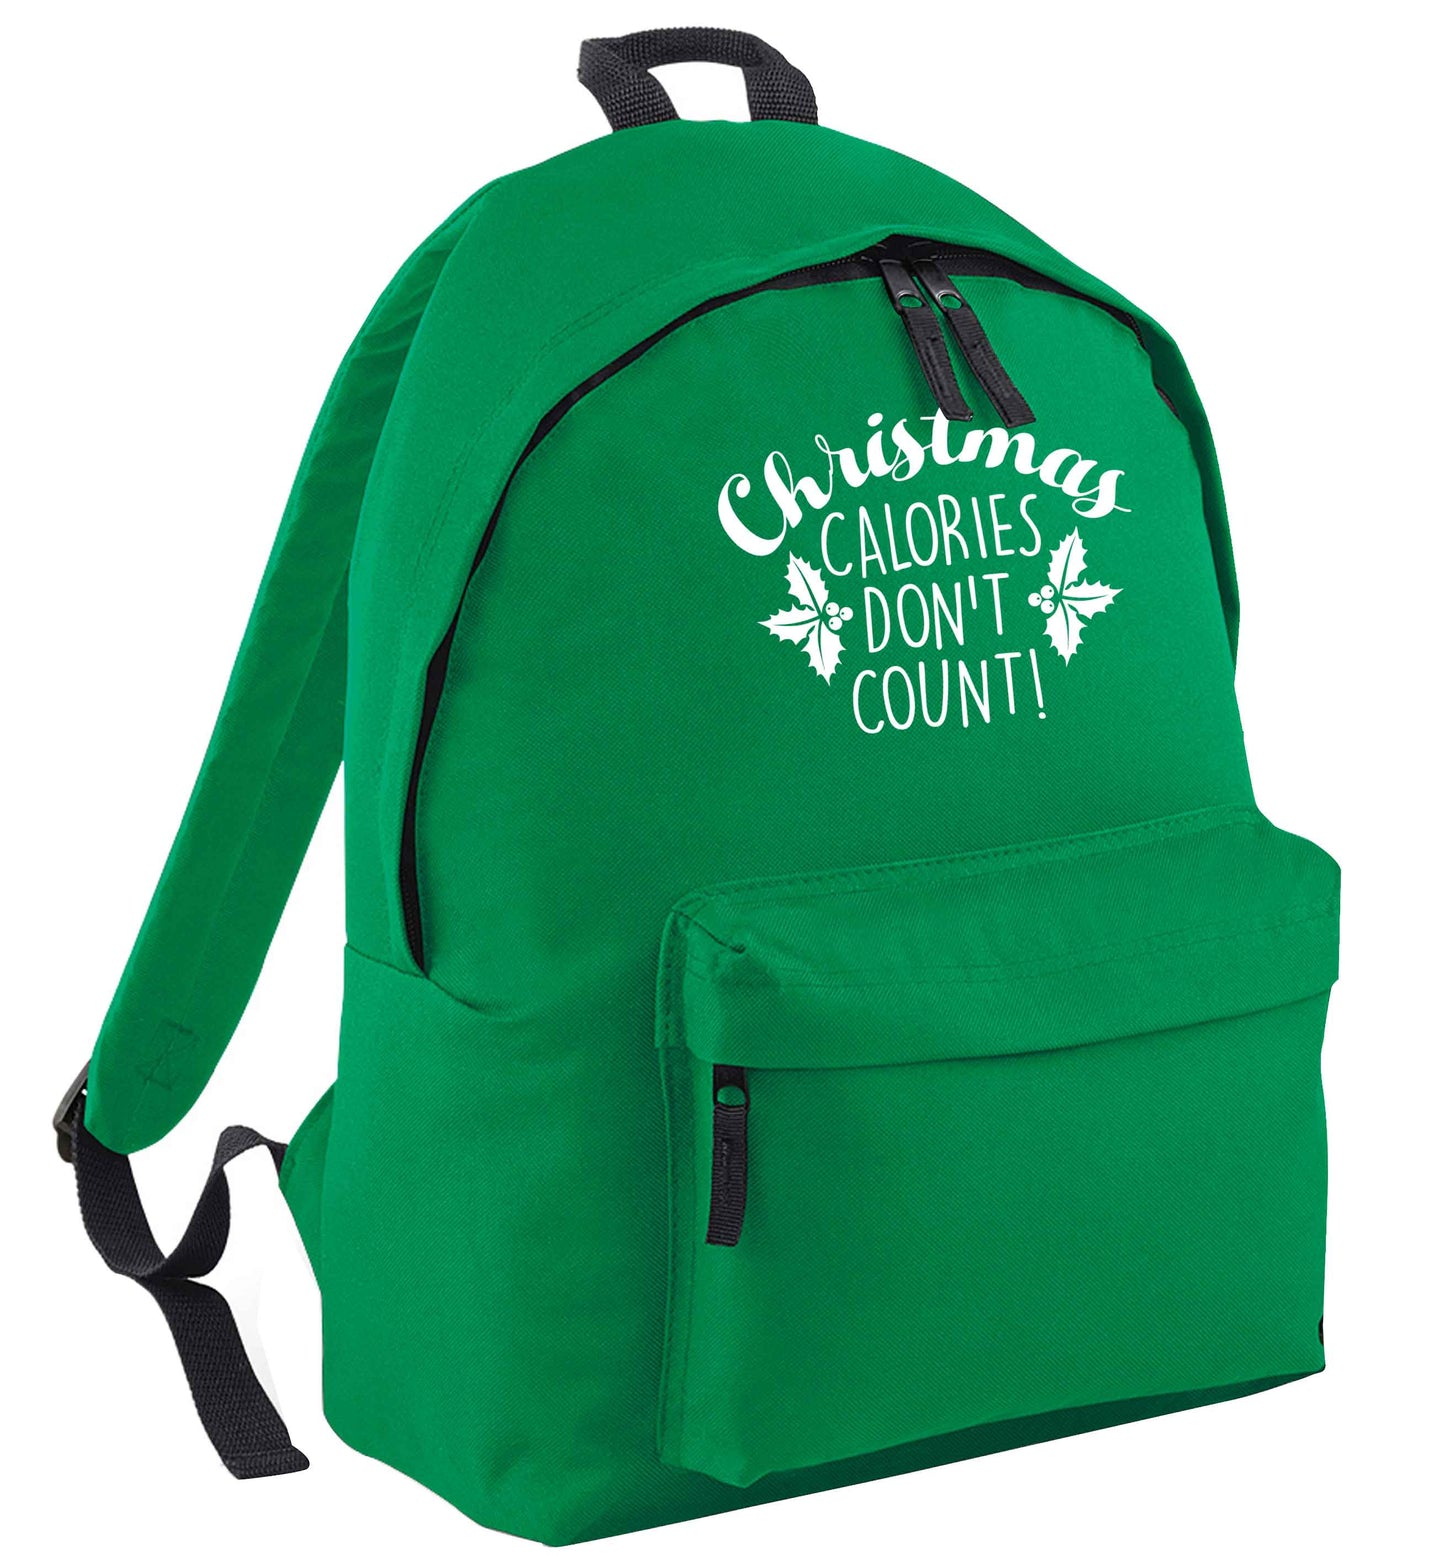 Christmas calories don't count green adults backpack